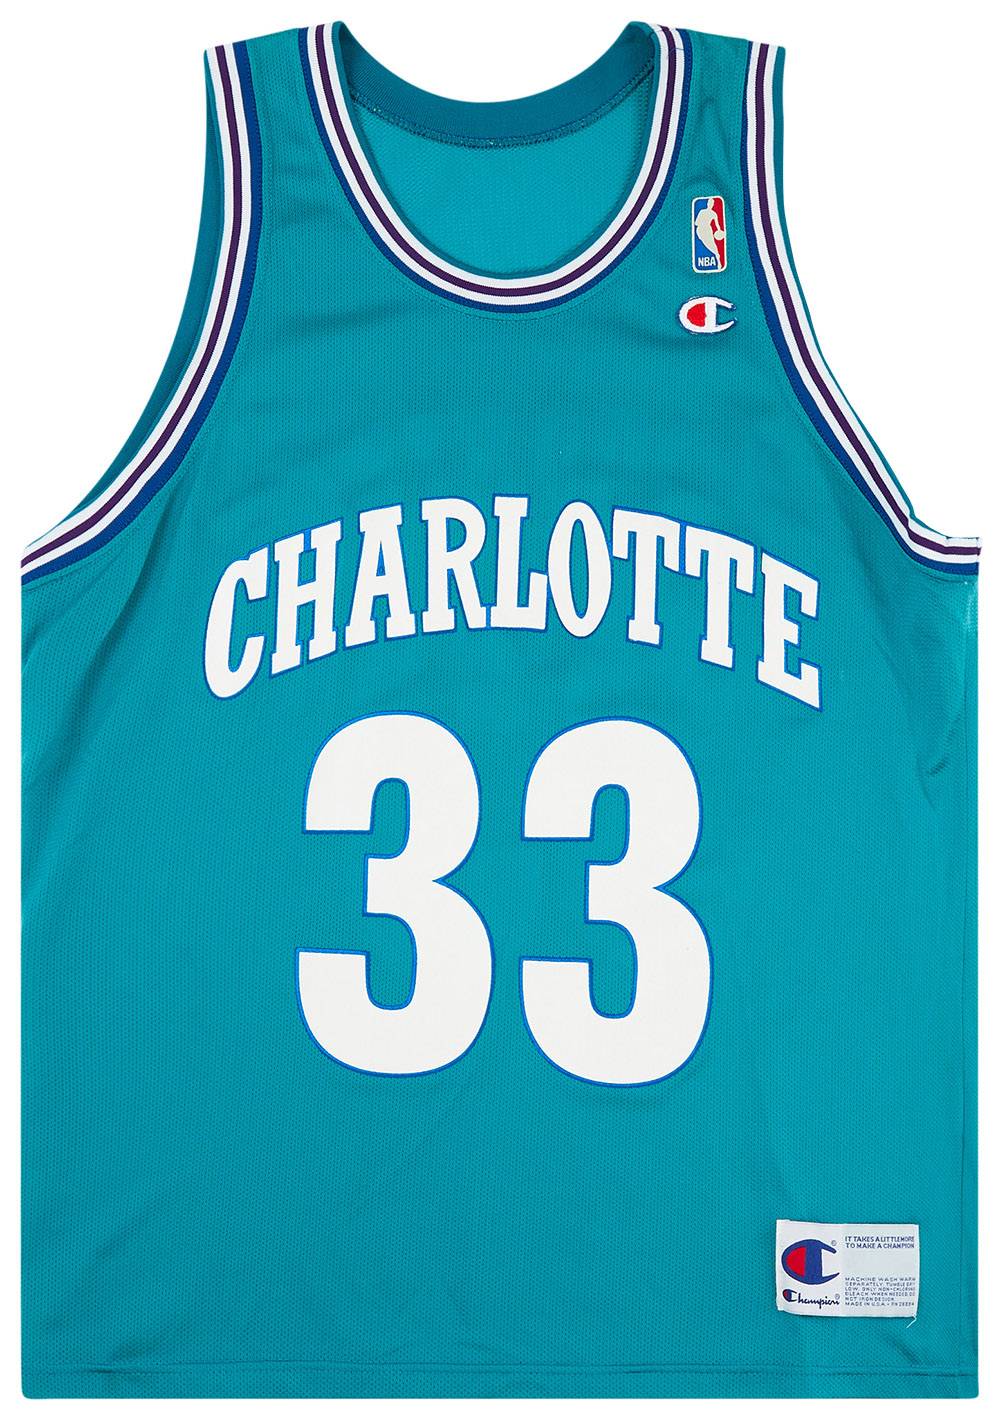 1992-95 Charlotte Hornets Mourning #33 Champion Away Jersey (Excellent) L